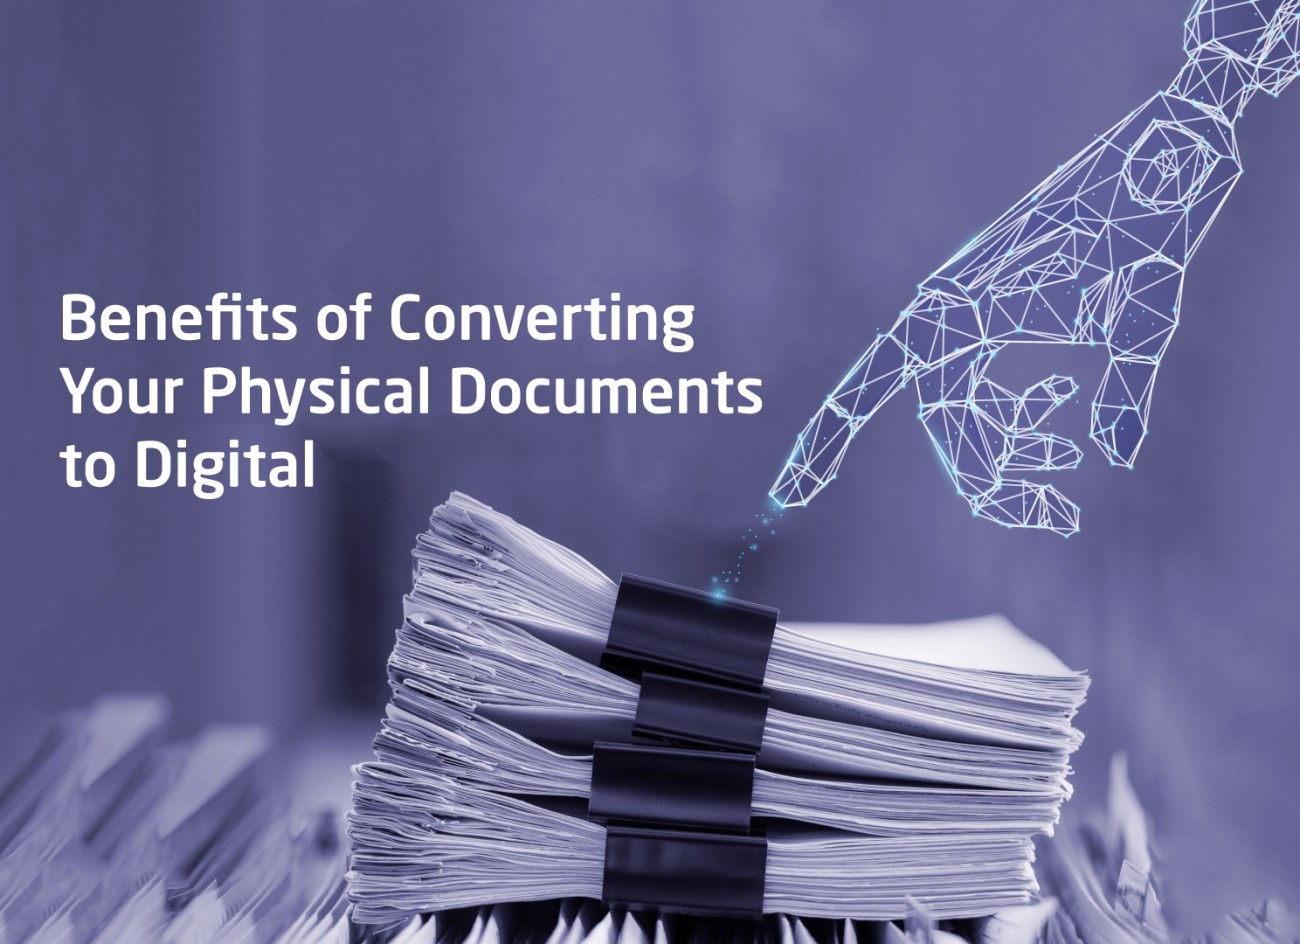 Benefits of Converting Your Documents to Digital